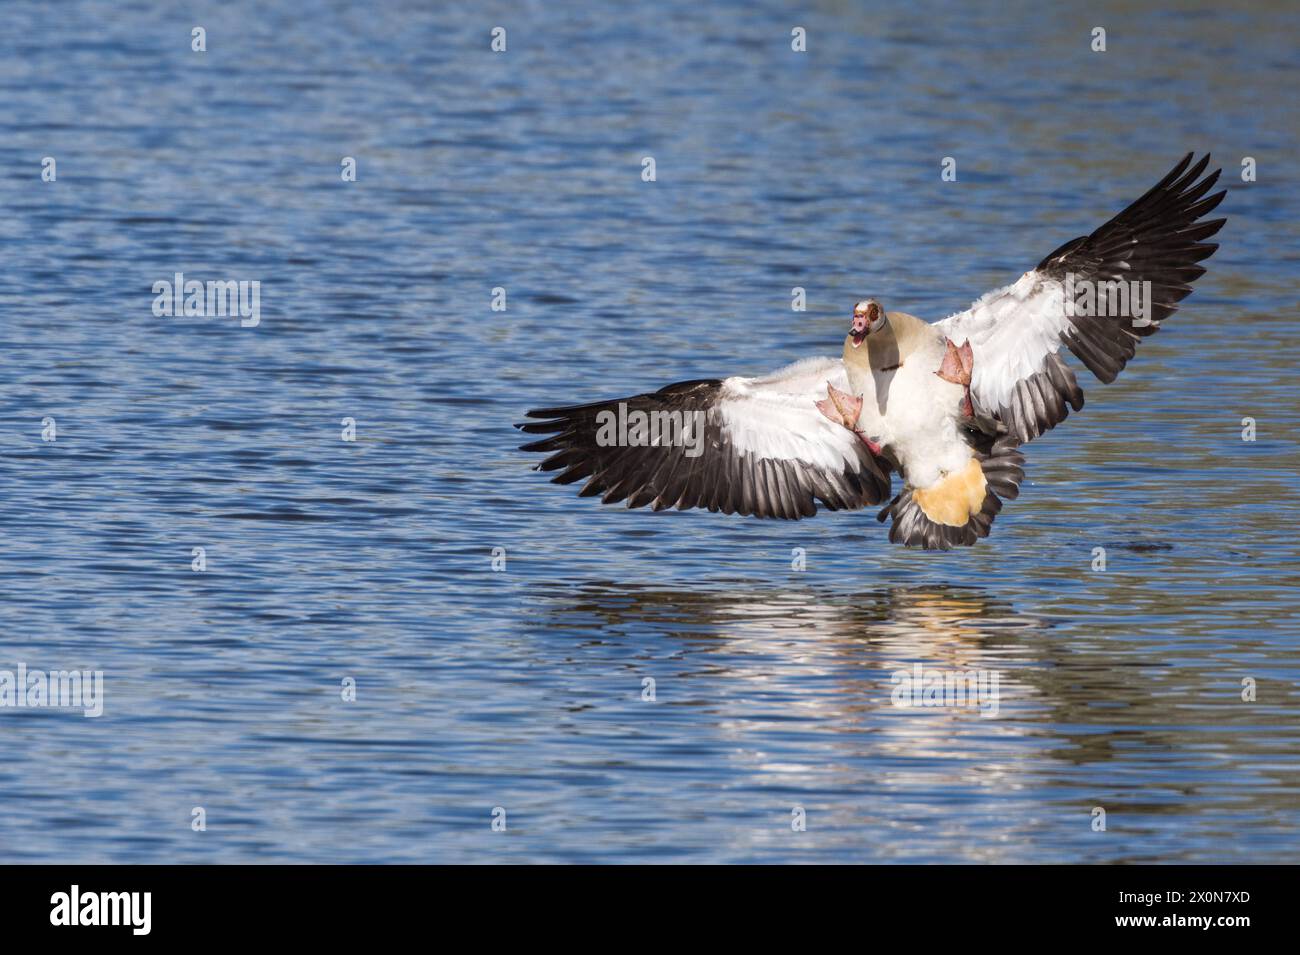 Male Egyptian goose landing on the water with wings spread and legs way in the air Stock Photo